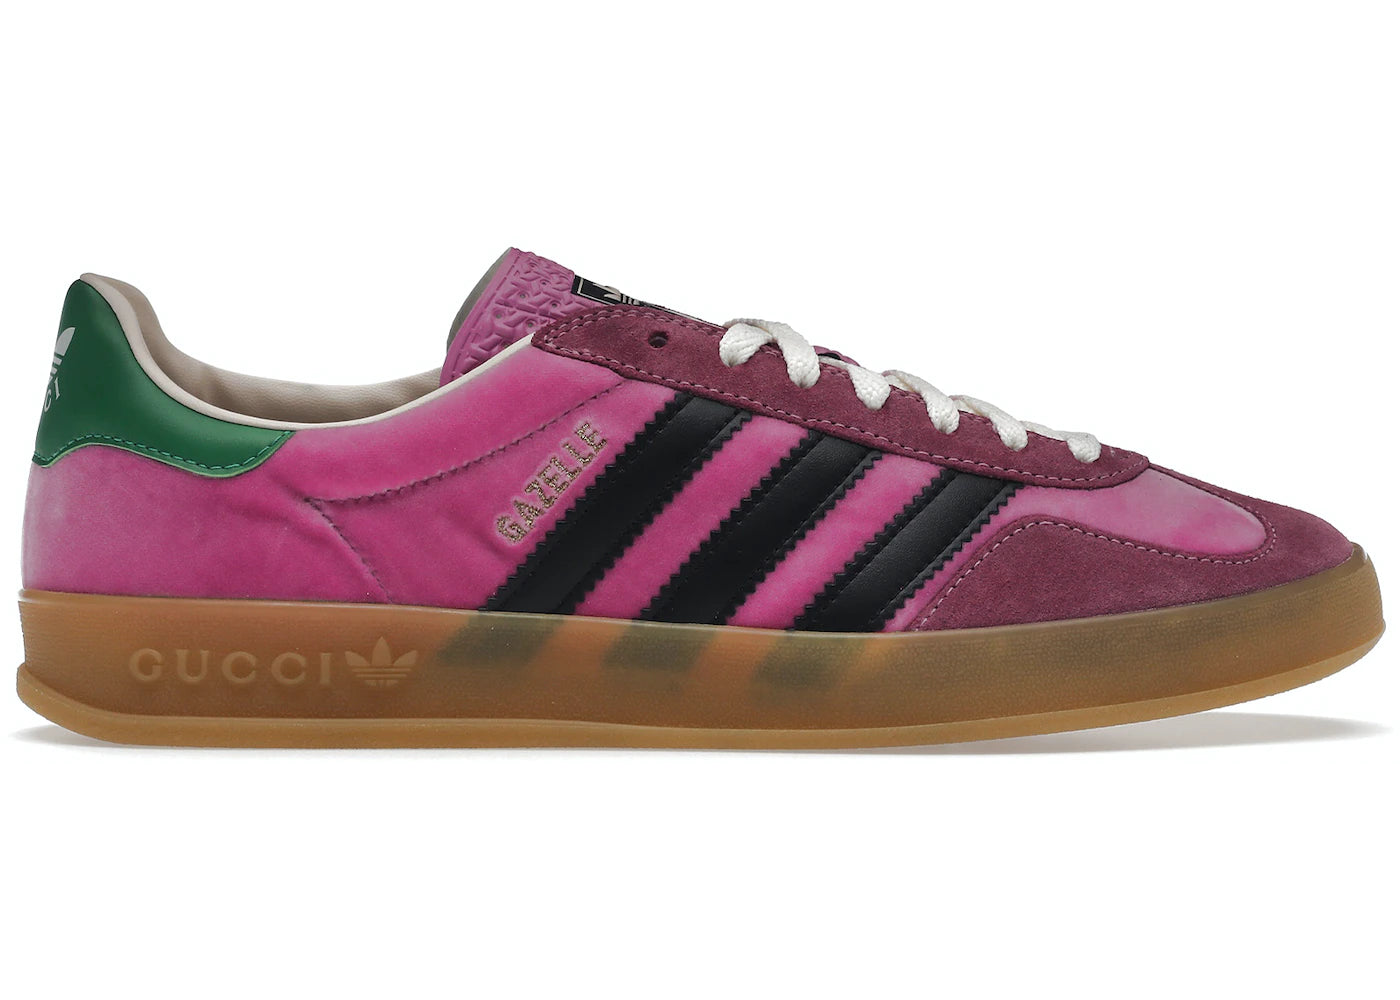 ADIDAS X GUCCI GAZELLE PINK - Uhfmr Sneakers Sale Online - adidas brasil page size list in